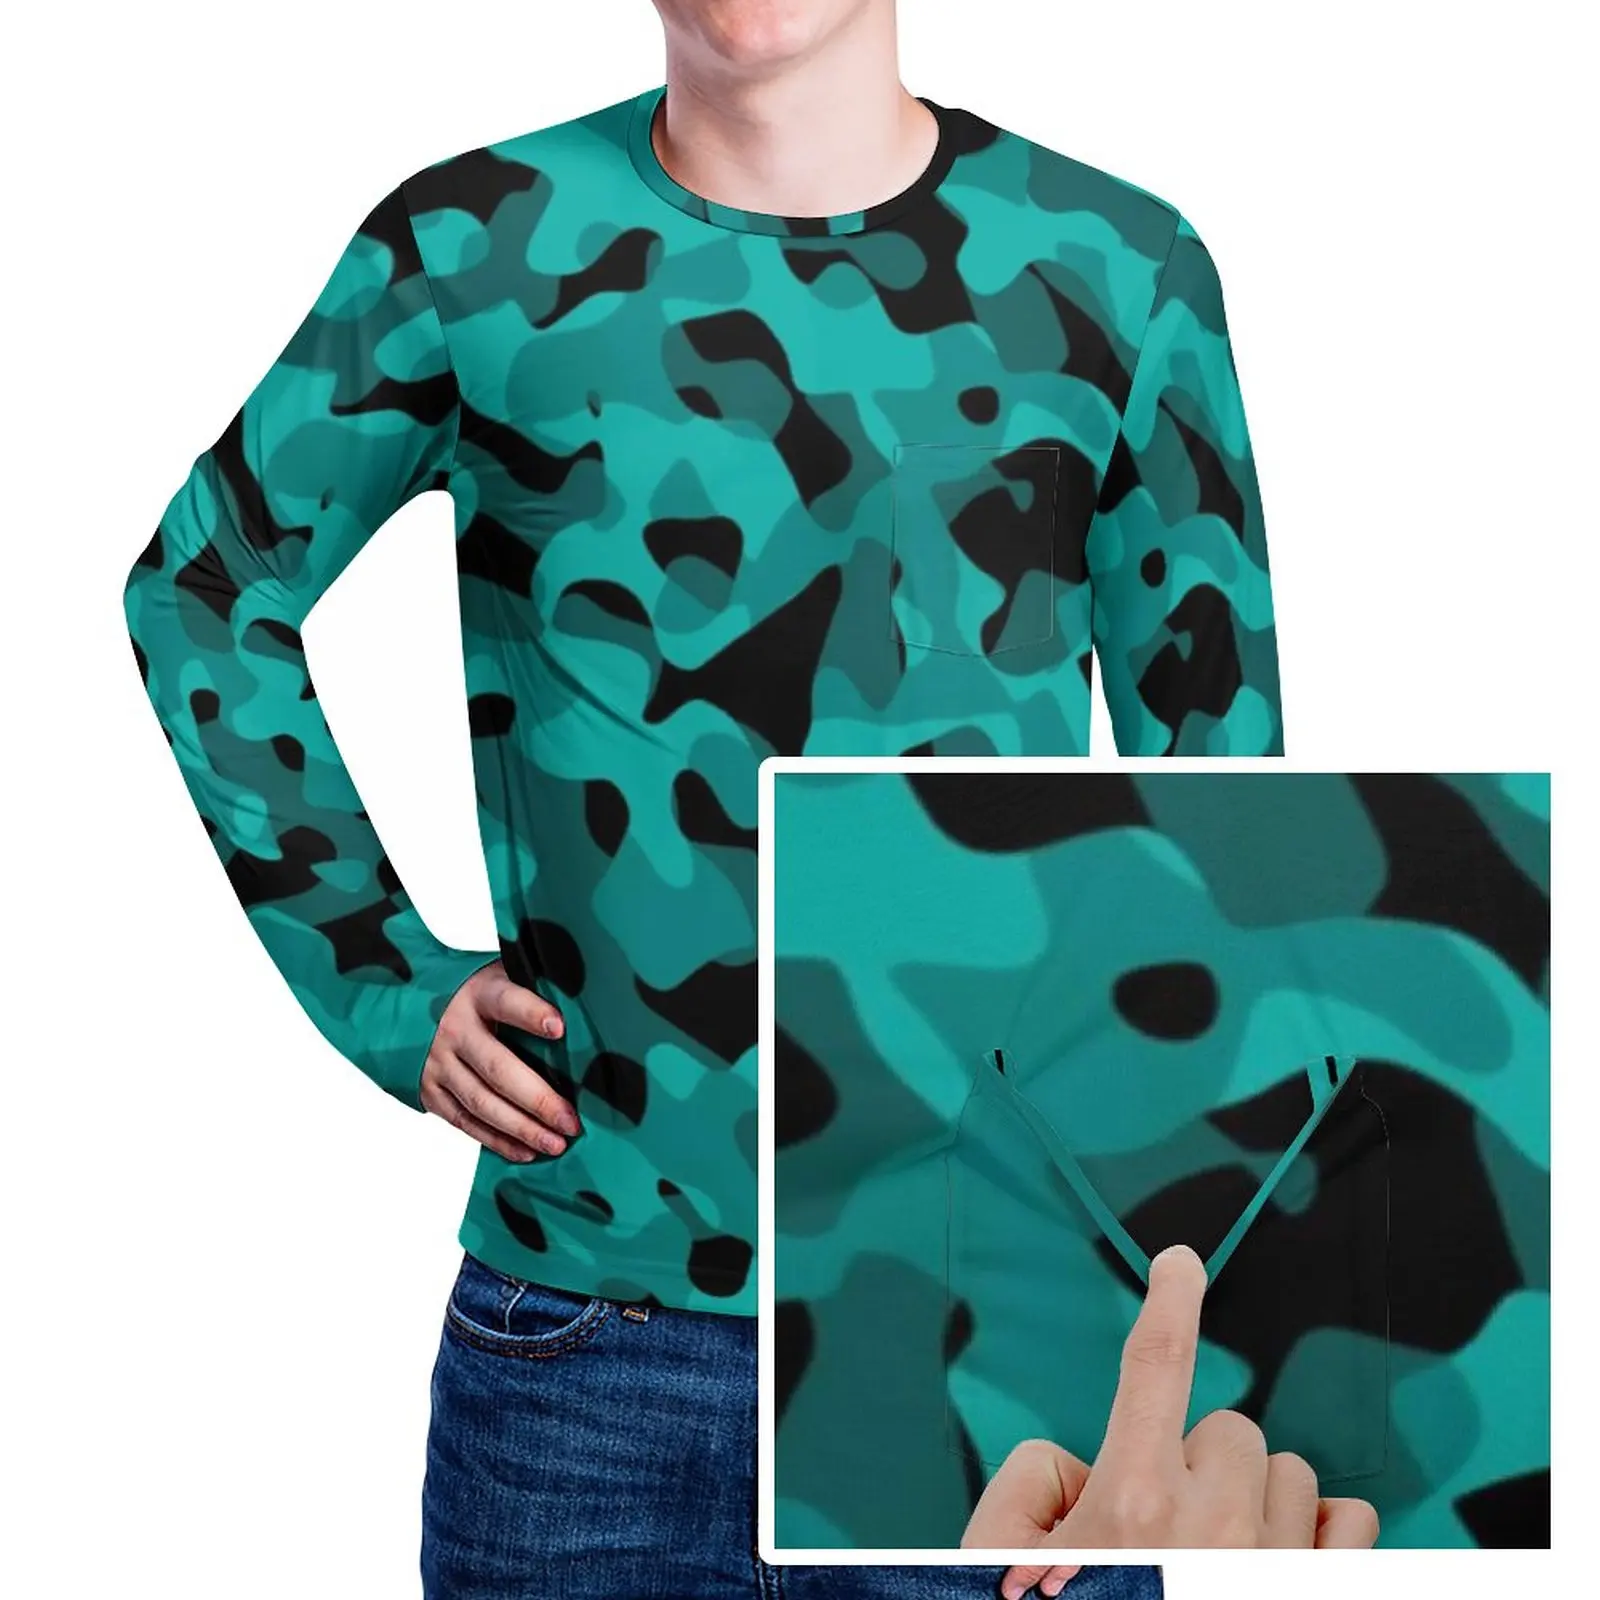 

Camouflage T-Shirt Spring Black and Teal Camo Funny T Shirts Male Novelty Graphic Tshirt Plus Size